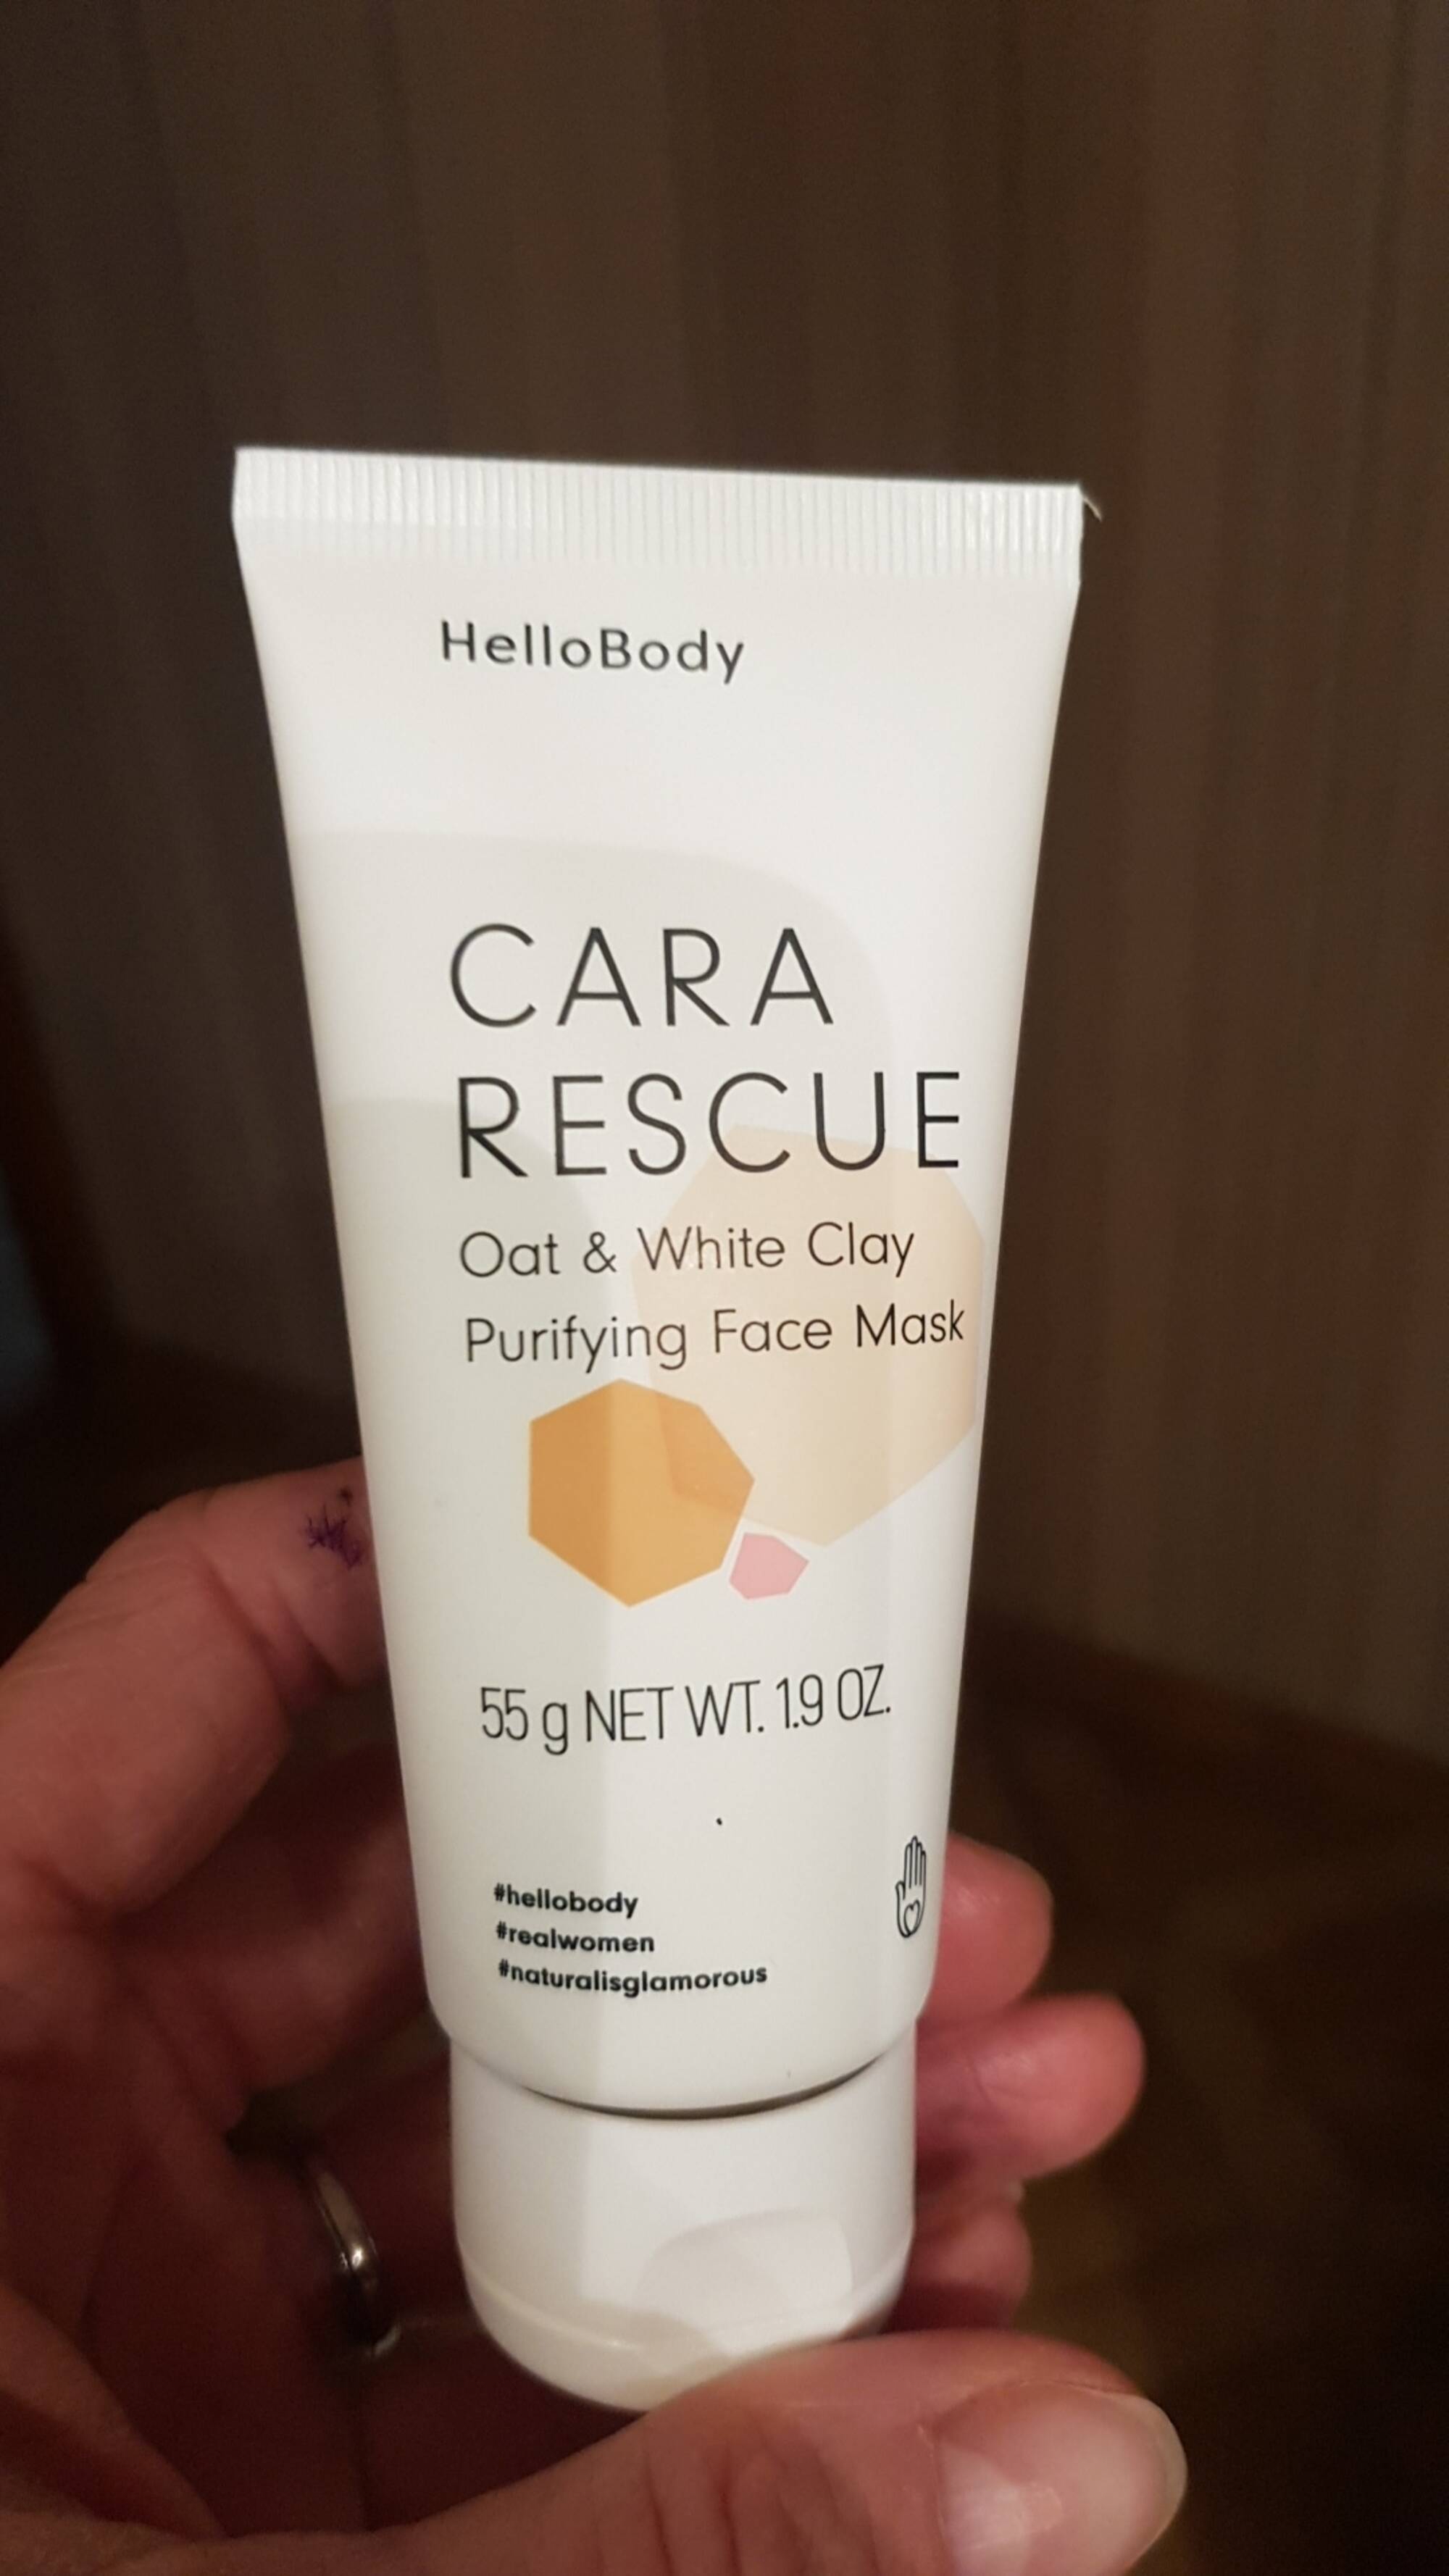 HELLOBODY - Cara rescue - Oat  & white clay purifying face mask